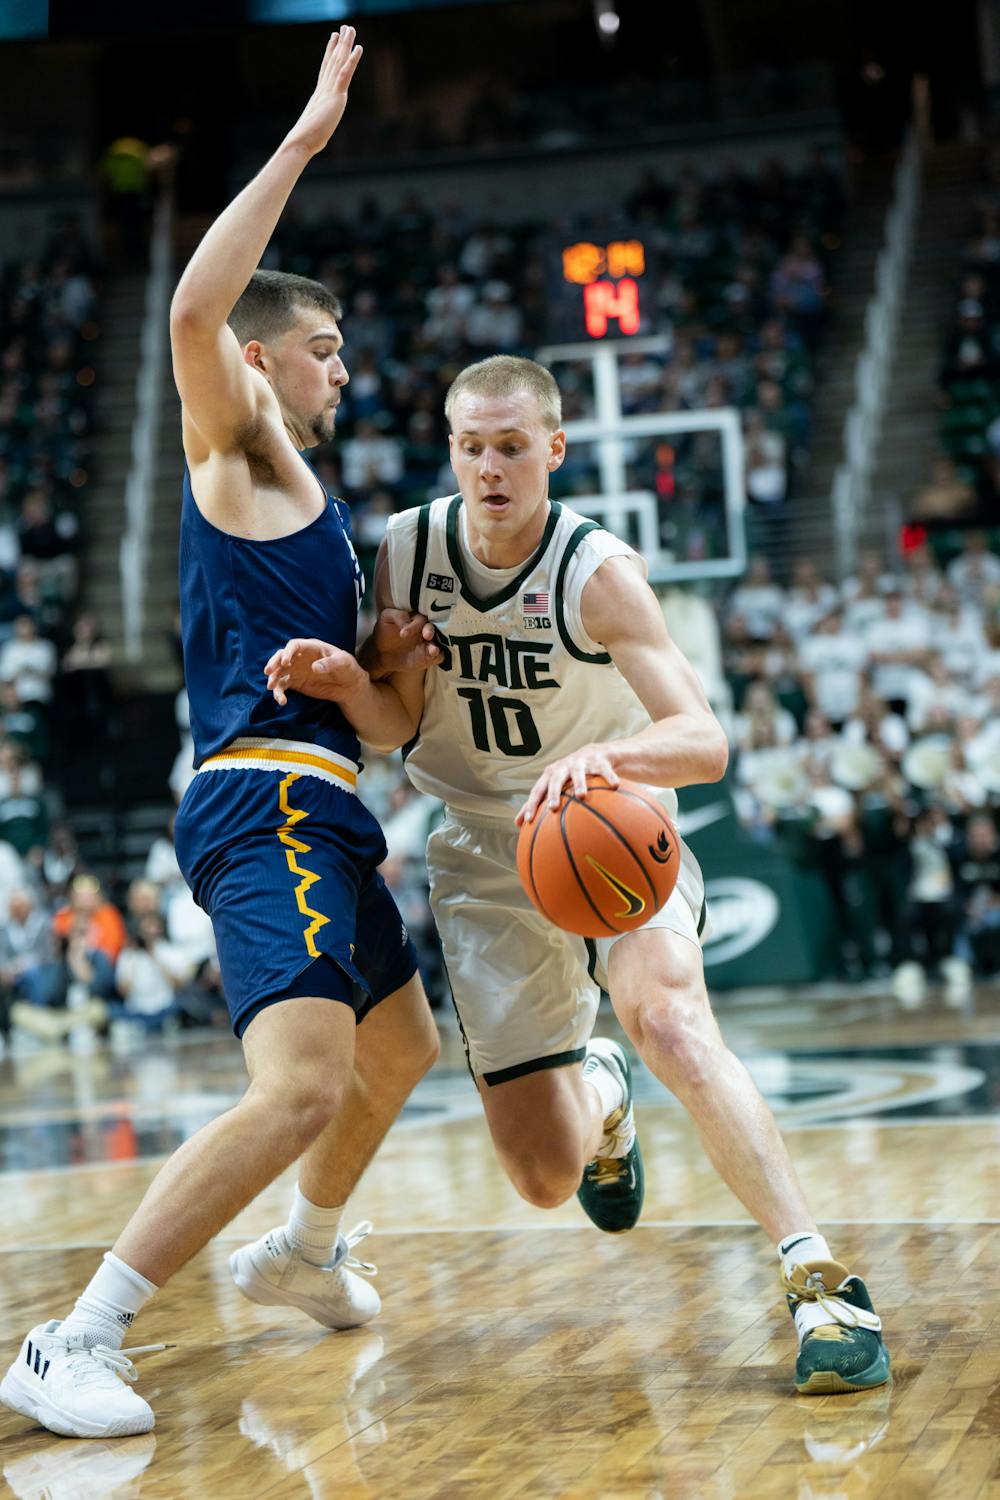 <p>Graduate student forward Joey Hauser pushes his way into the lane during the Spartans' 73-55 win over Northern Arizona on Nov. 7, 2022.</p>